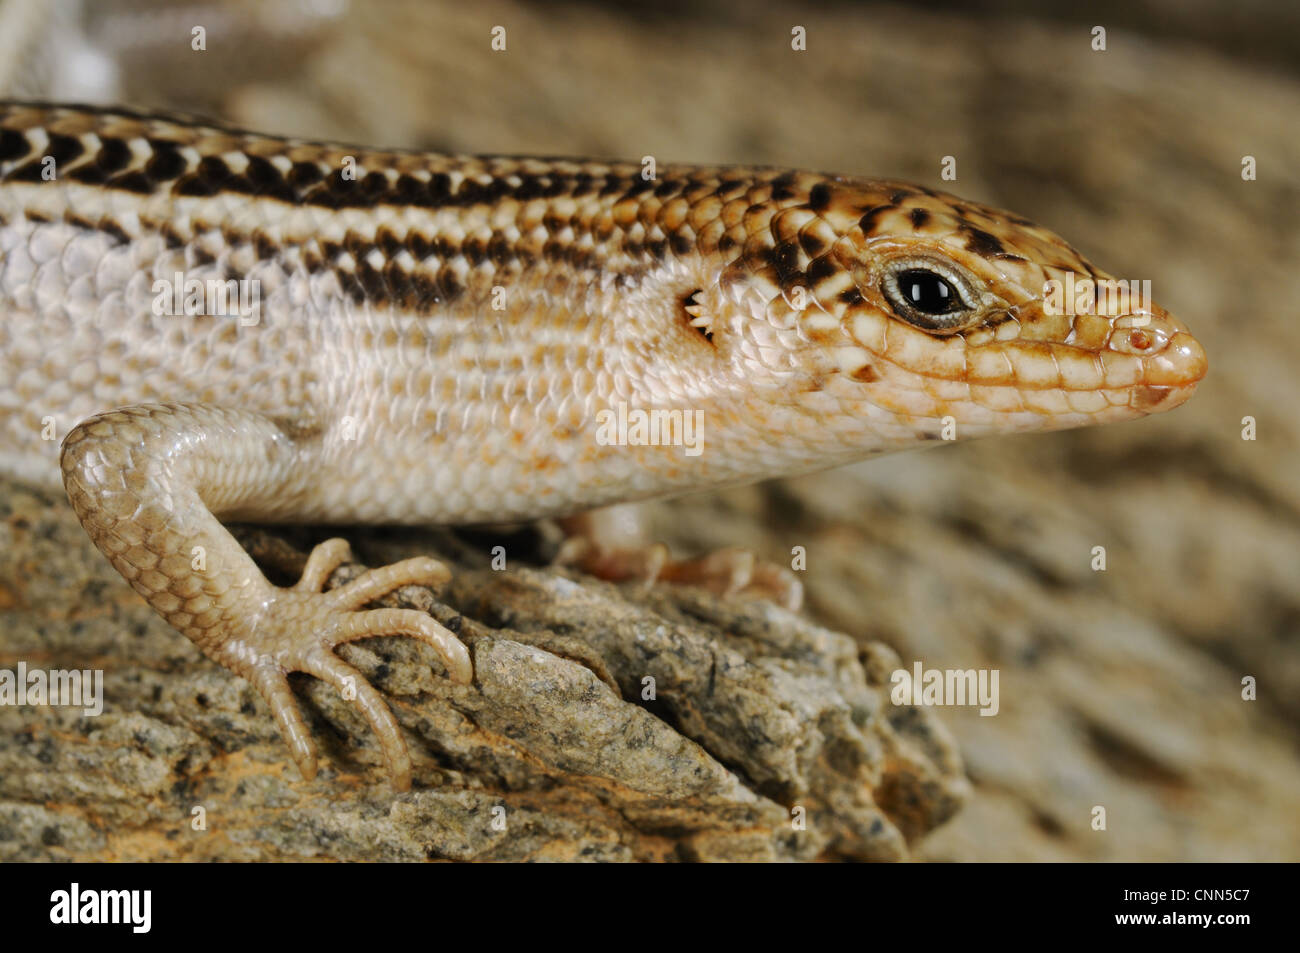 Socotra Skink (Trachylepis socotrana) adult, close-up of head and front legs, Socotra, Yemen, march Stock Photo